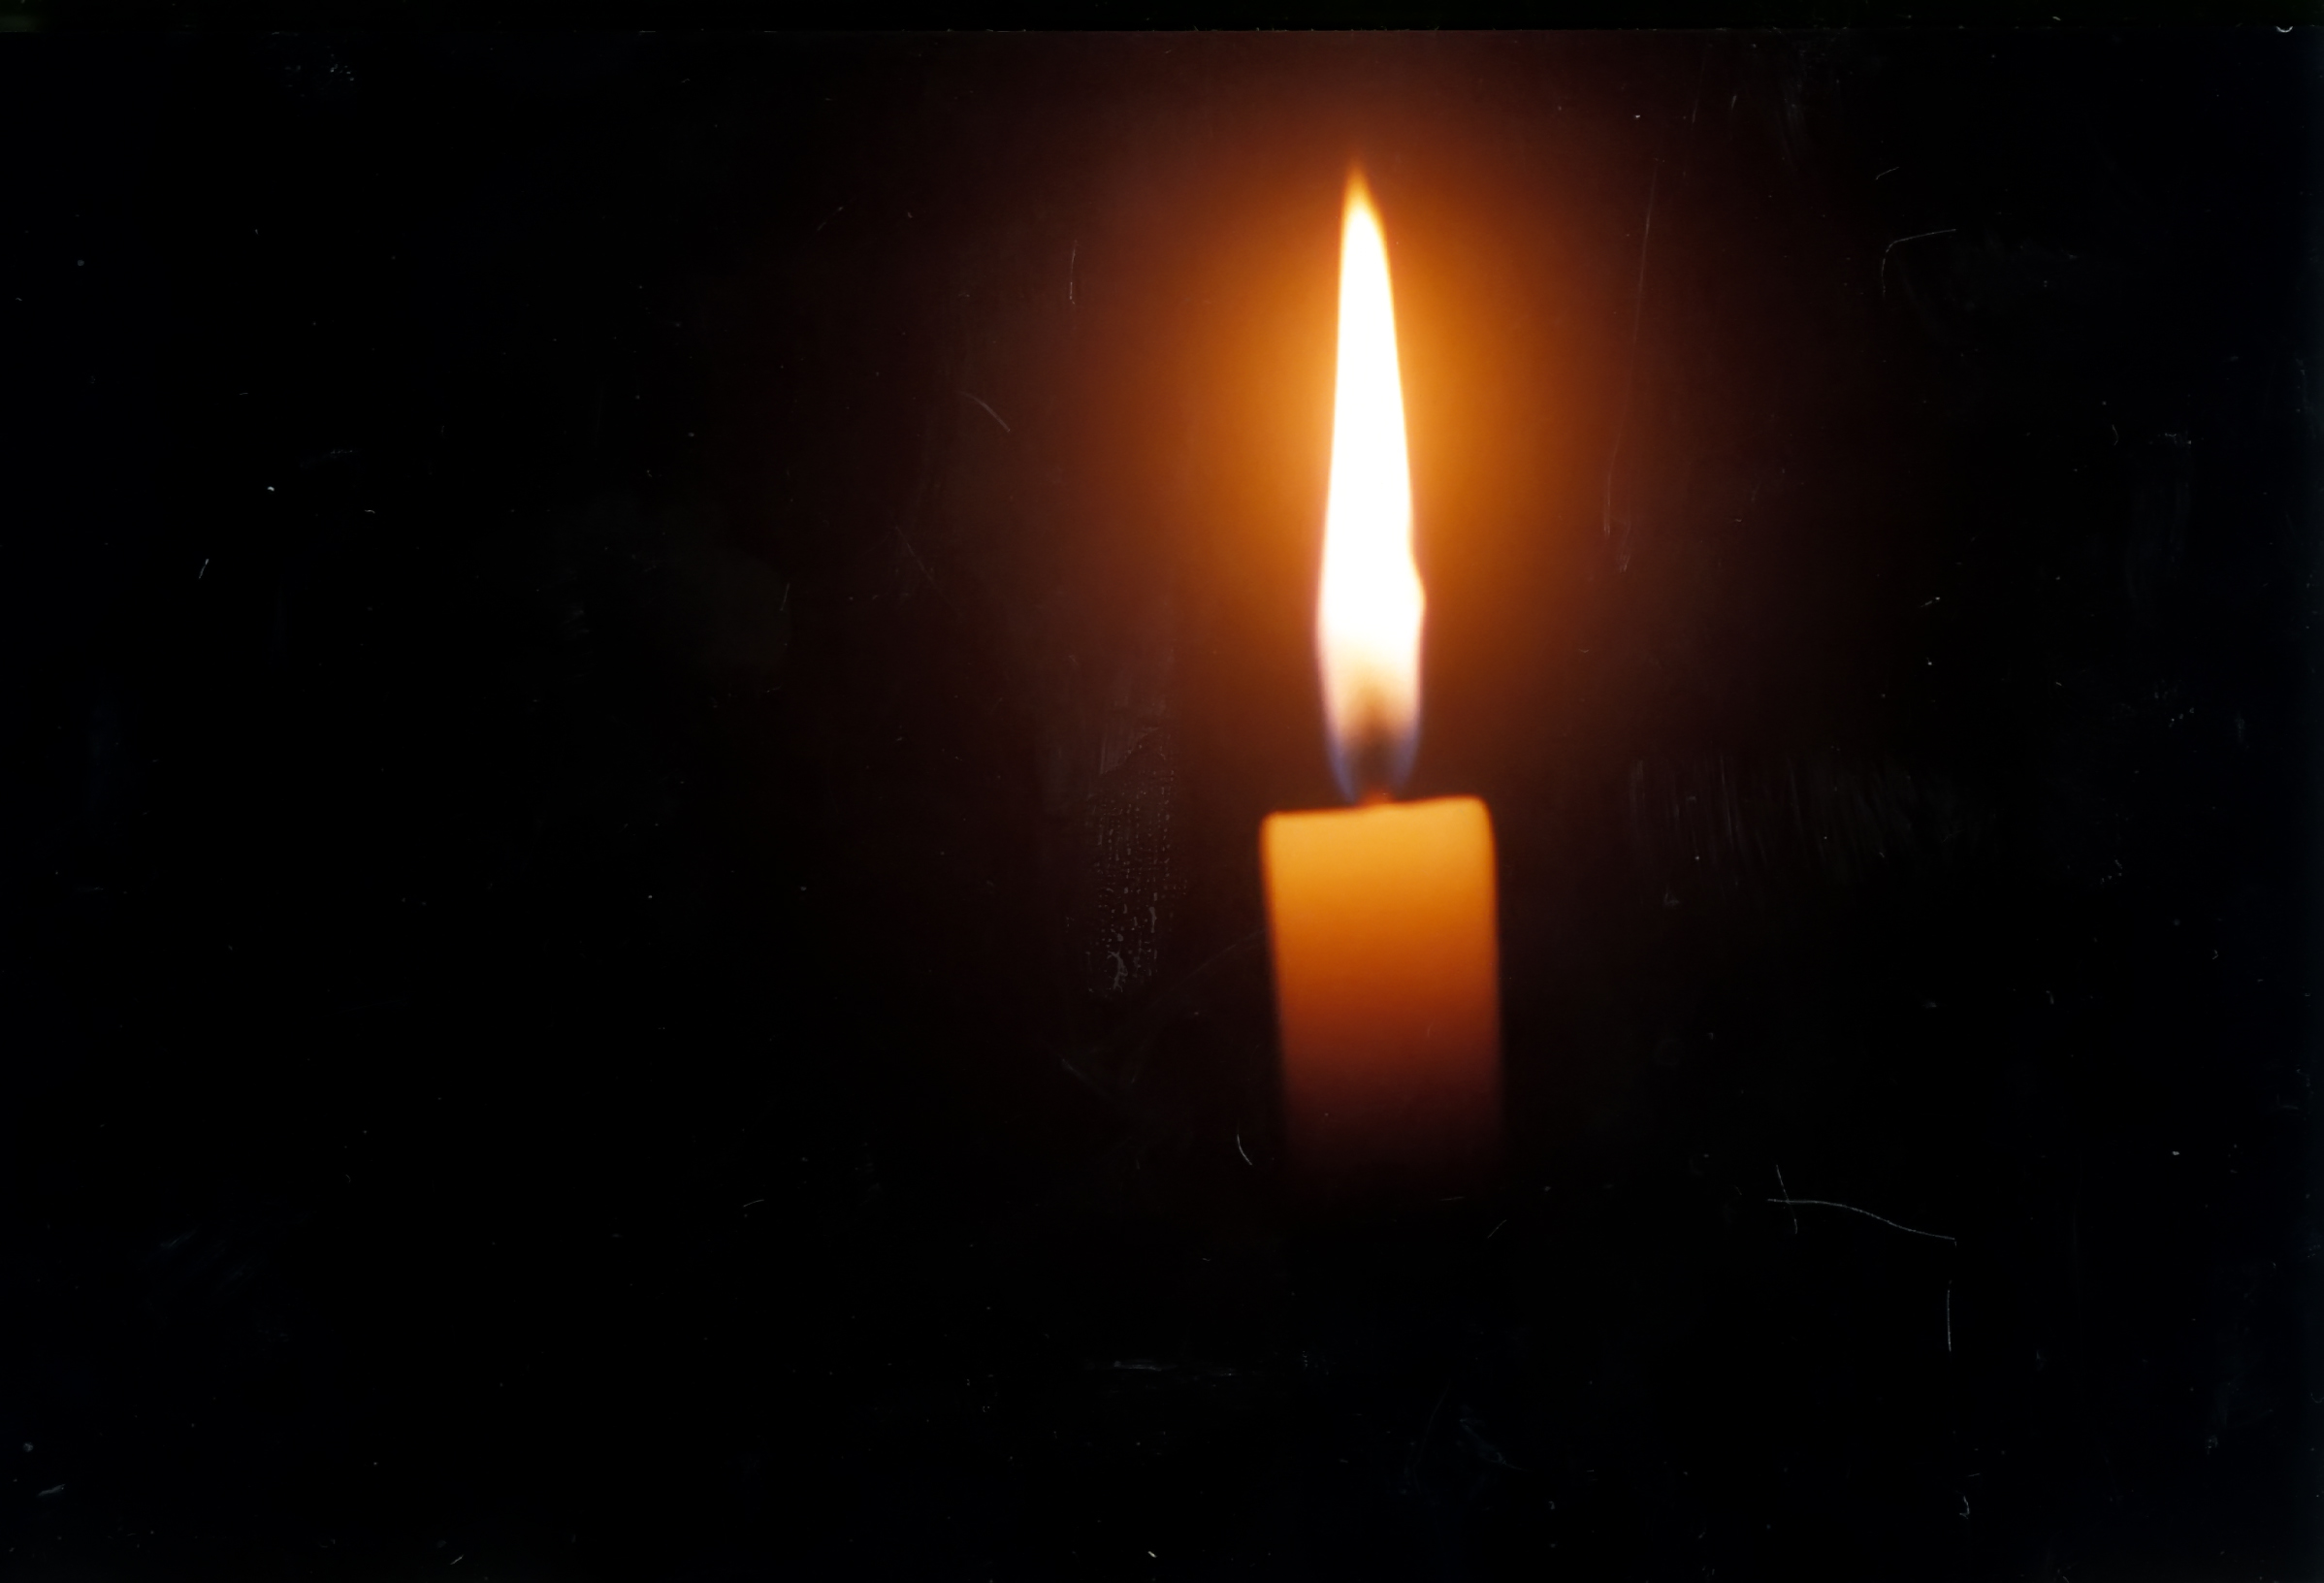 Candle flame, Candle, Dark, Effects, Flame, HQ Photo